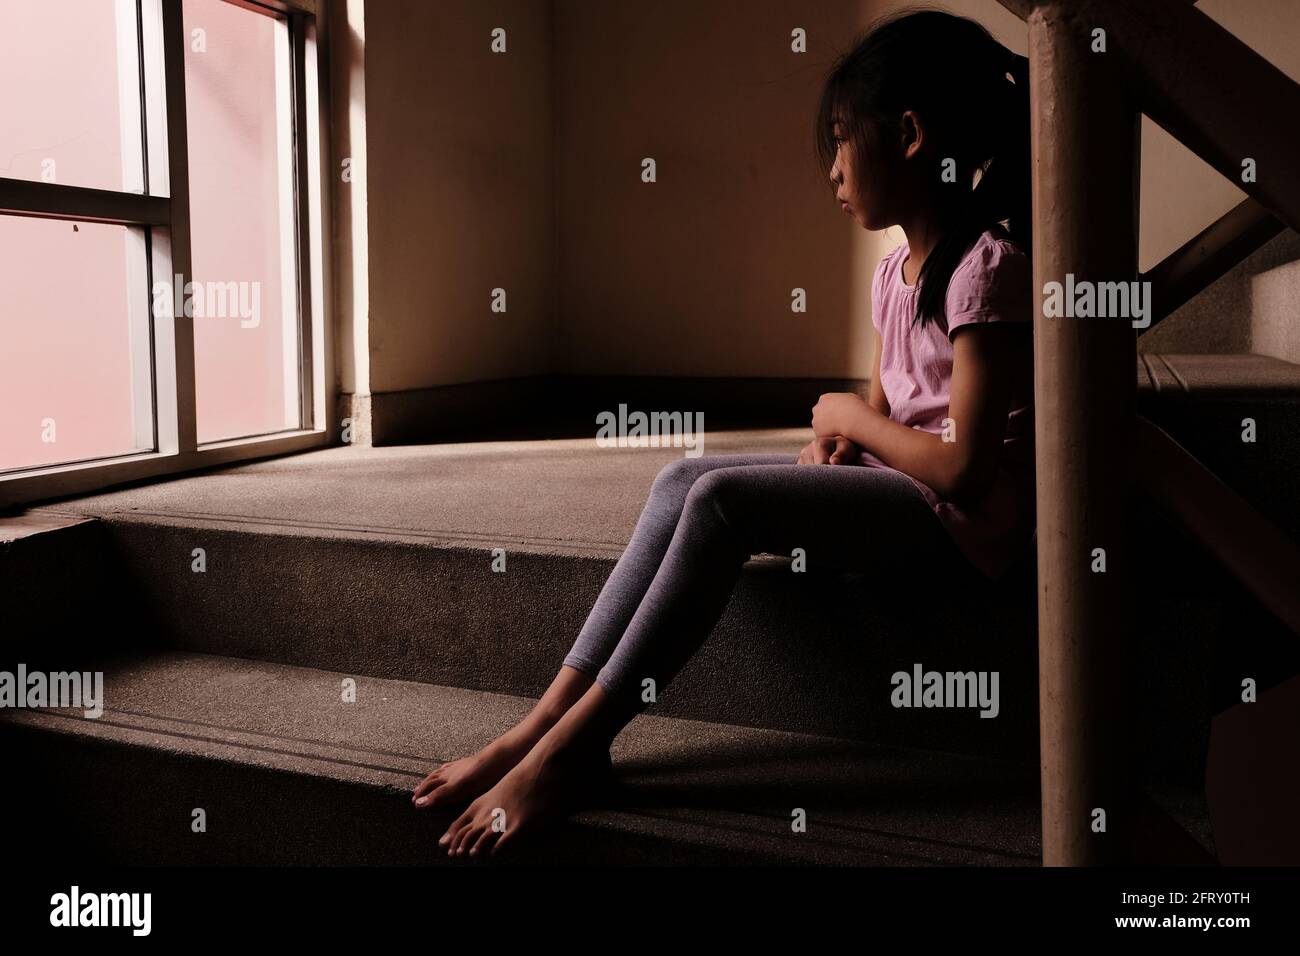 Child abuse concept. A sad and lonely young girl sitting by a stair inside a build with light through glass window in the background. Stock Photo